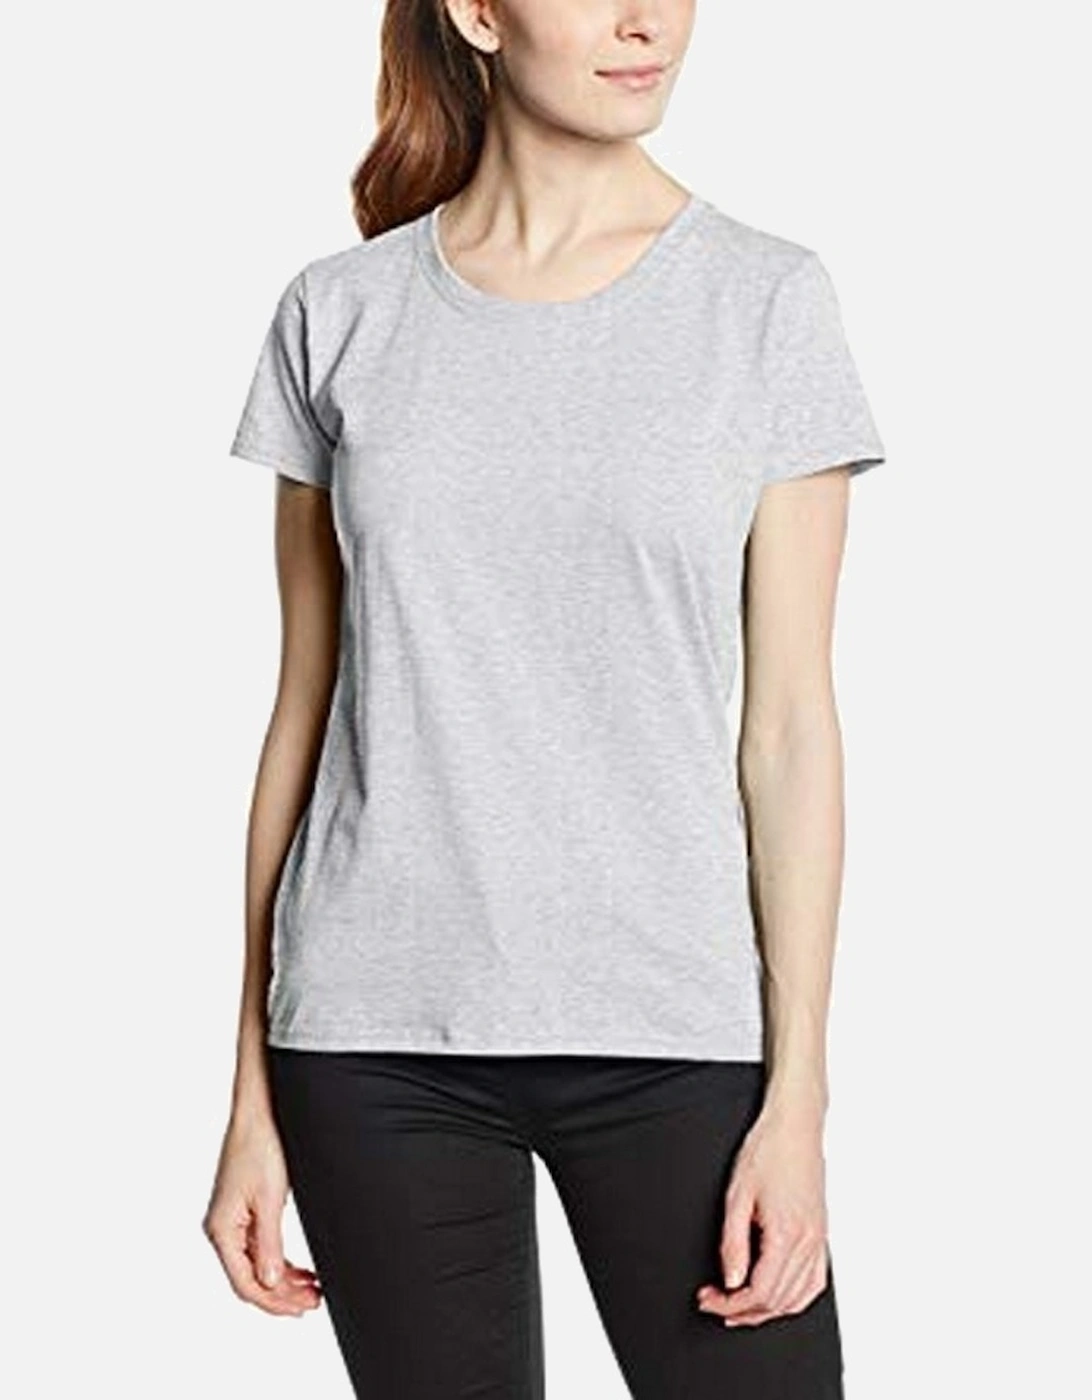 Ladies/Womens Lady-Fit Valueweight Short Sleeve T-Shirt